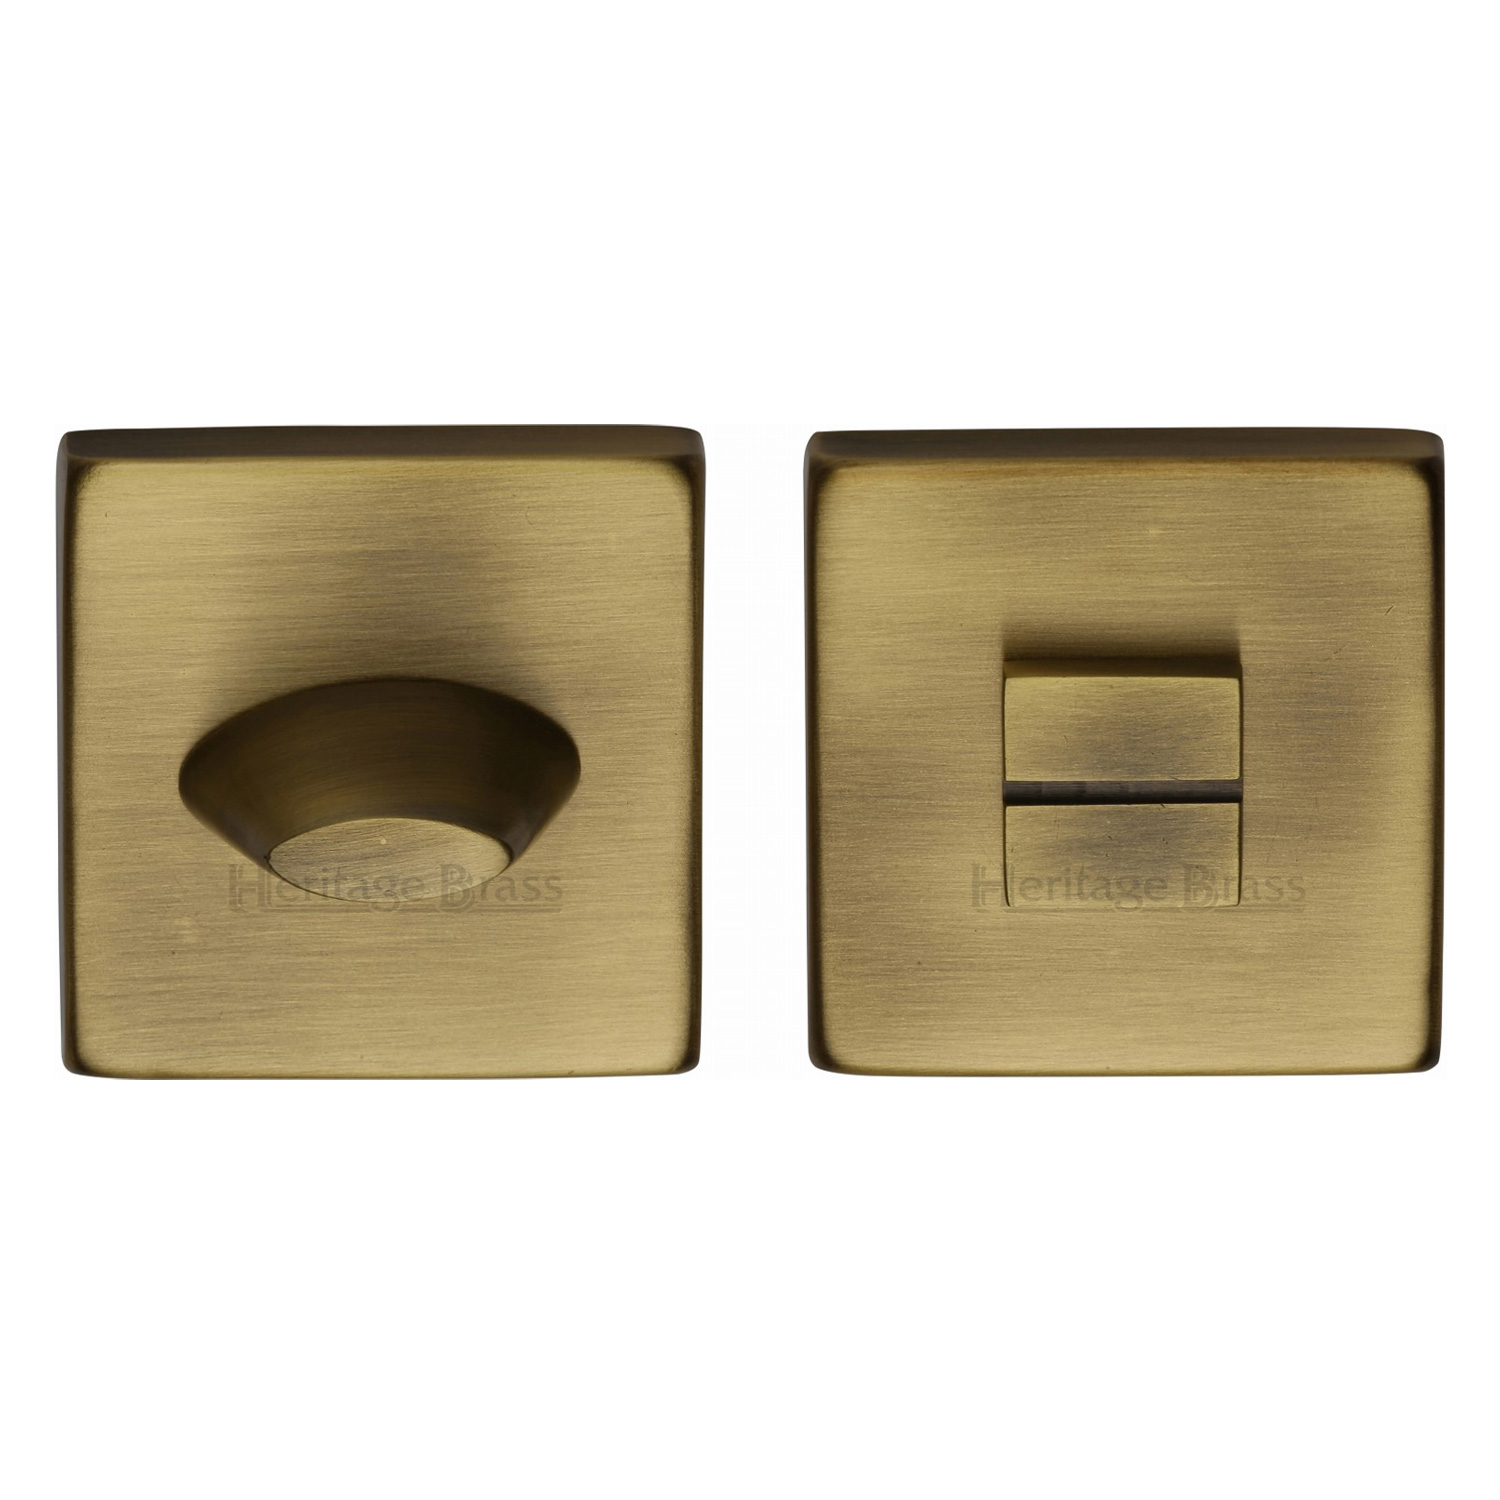 Heritage Brass Square Thumbturn & Emergency Release